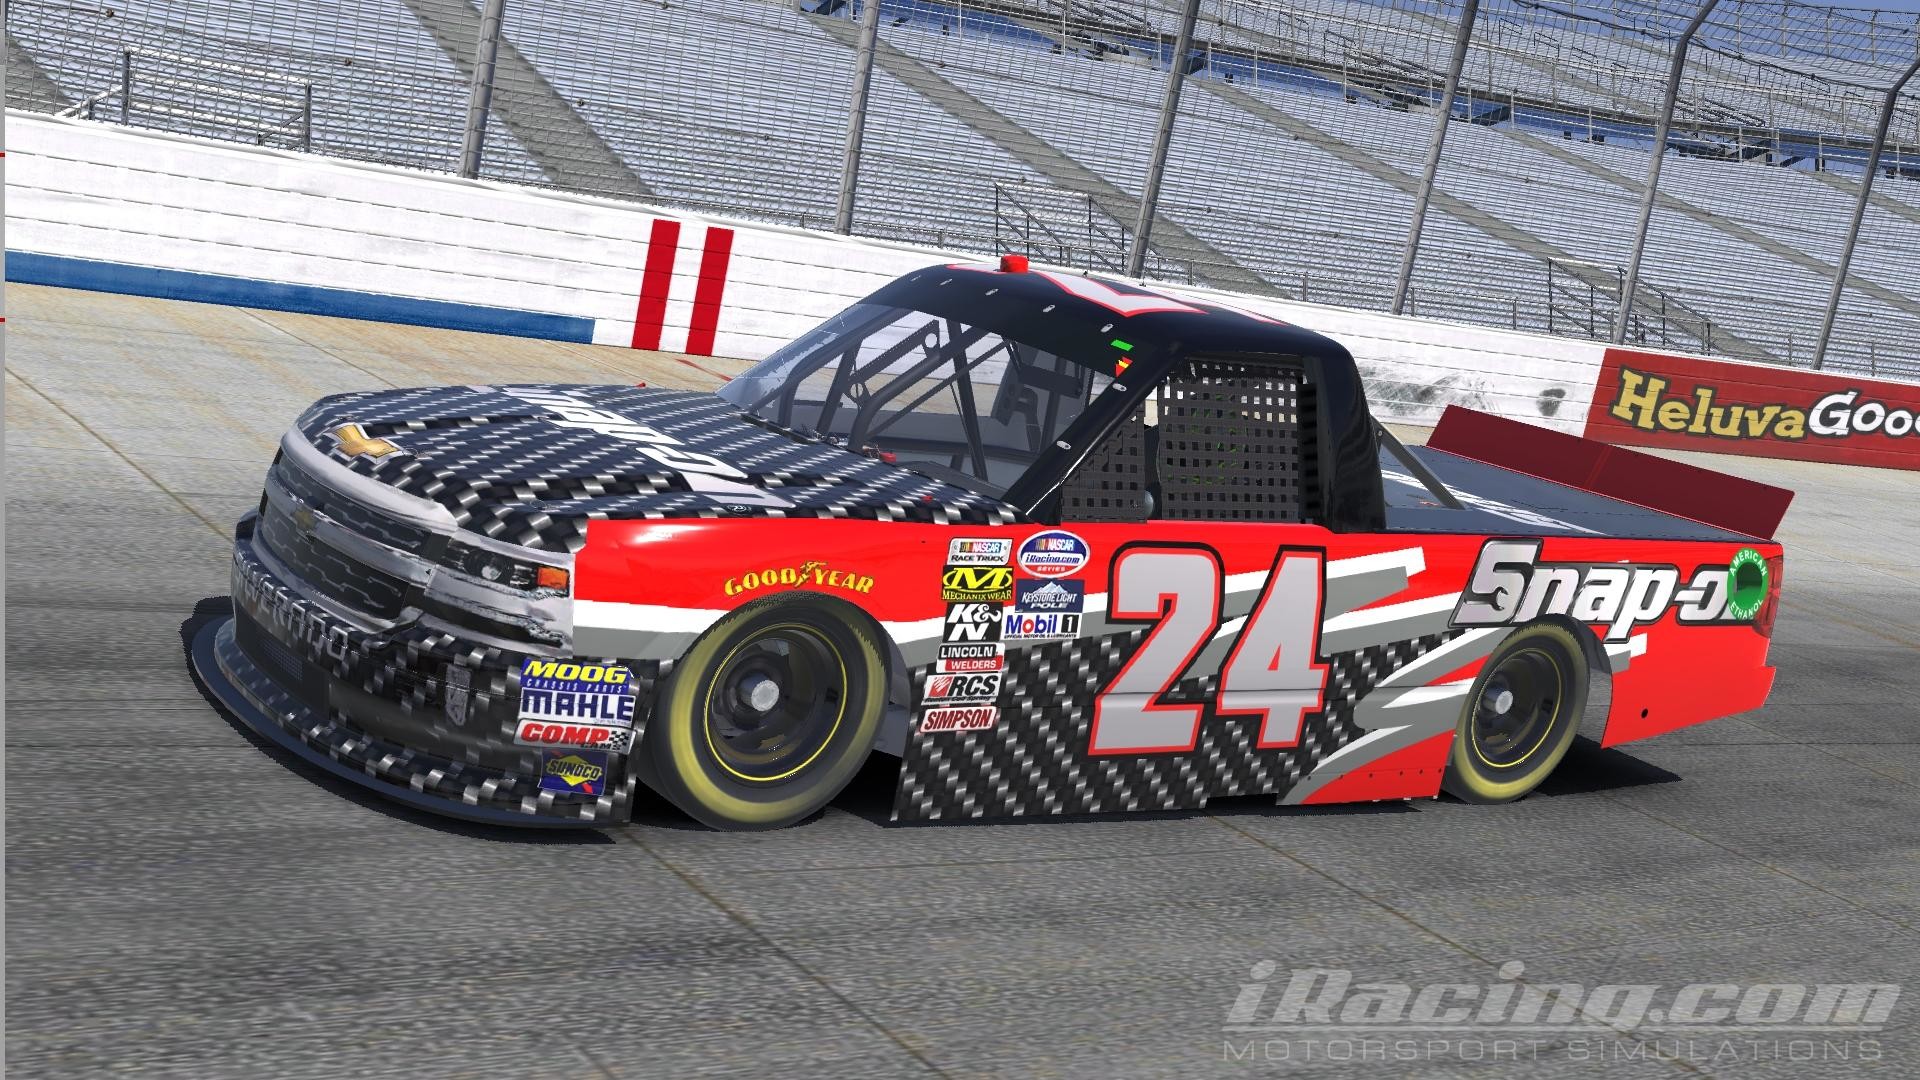 This paint scheme is unlisted. Only those with the link can see it